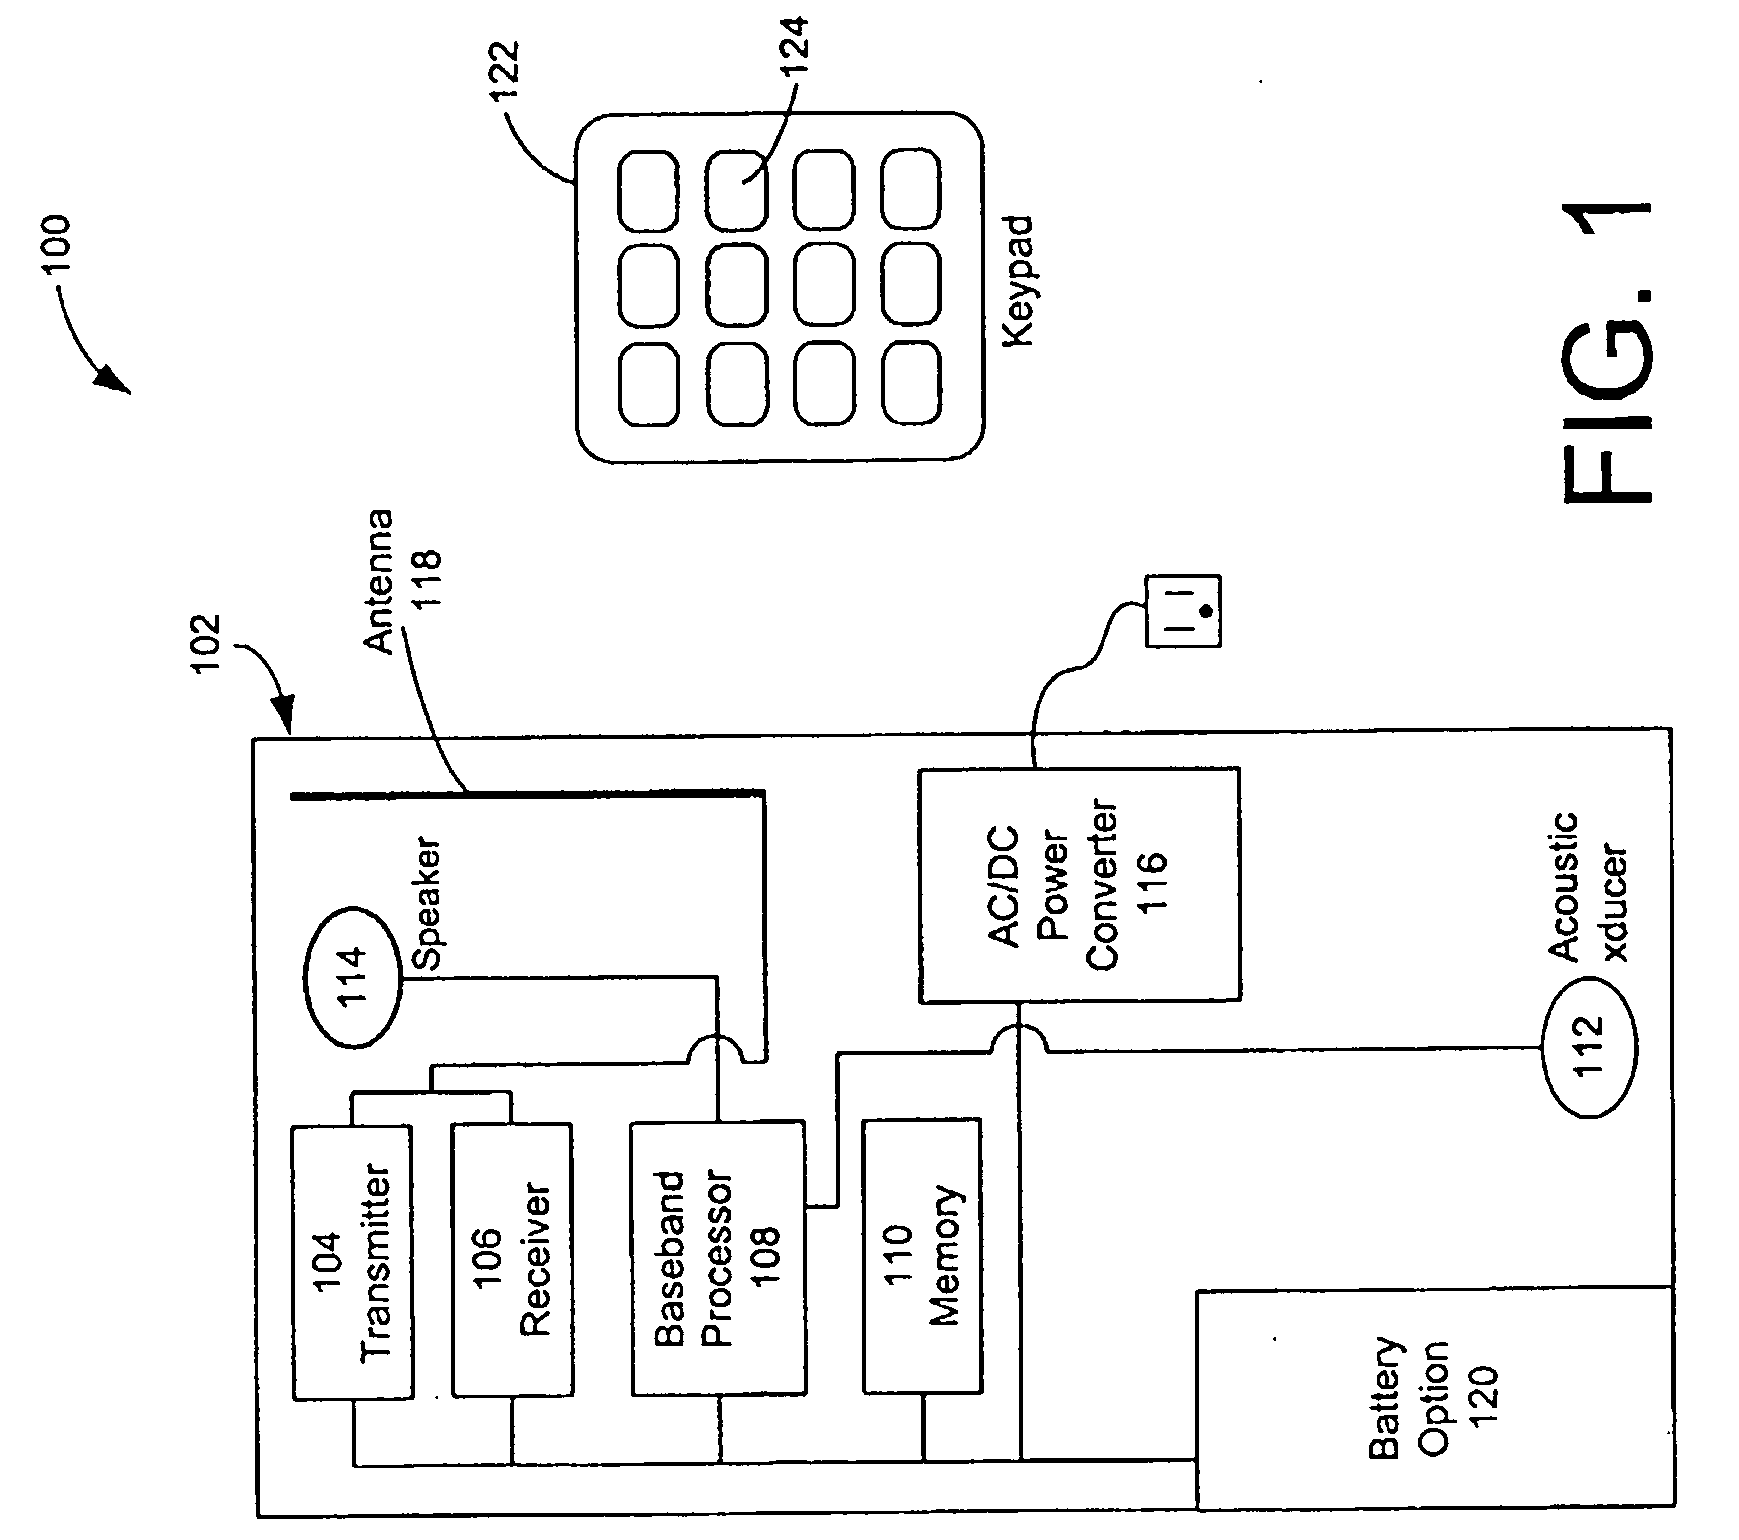 Apparatus and method for providing dynamic communications network traffic control